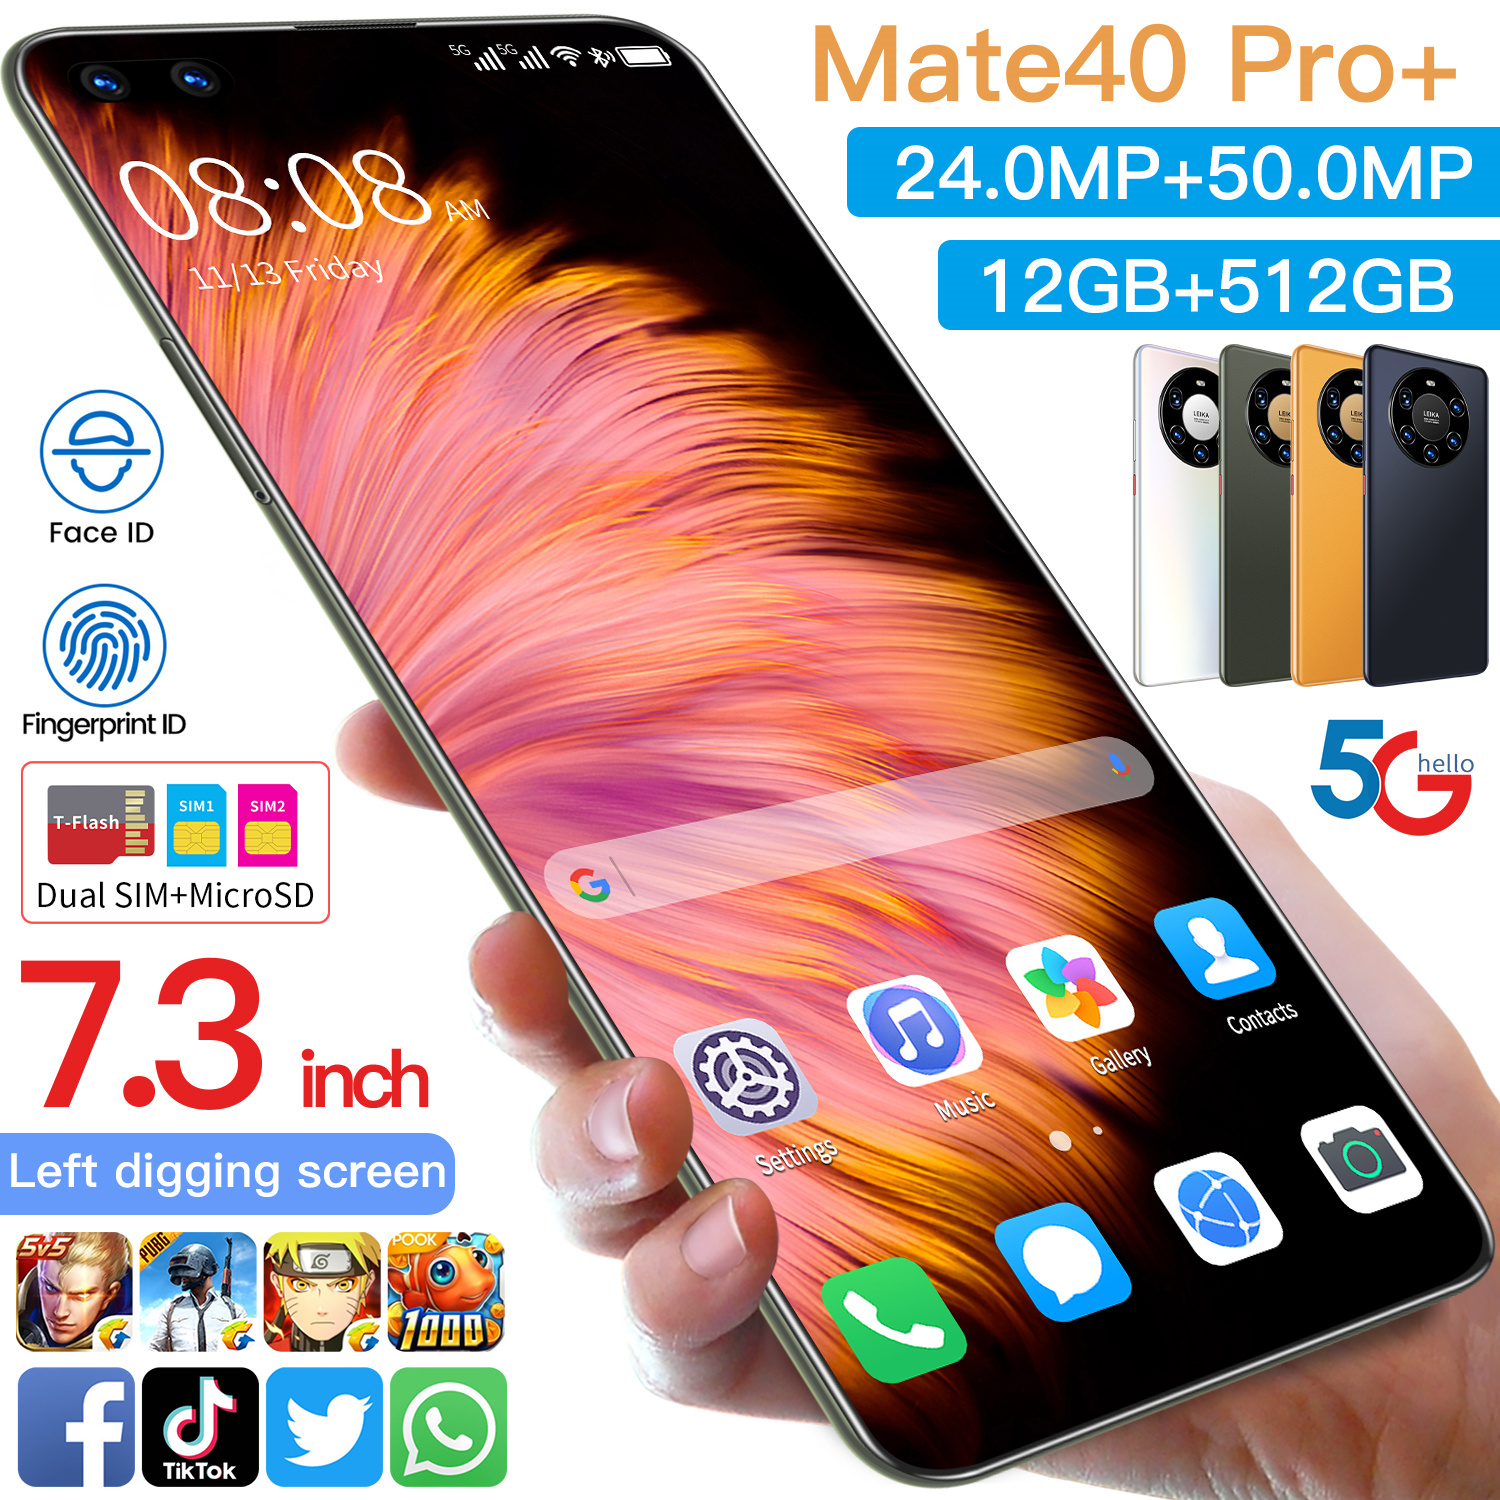 

MATE40Pro Cell phone 7.3 Inch 6000mAh Octa Core Quad 16GB 512GB Rear Camera Android Mobile Phone 5G 4G LTE Smartphone, Black